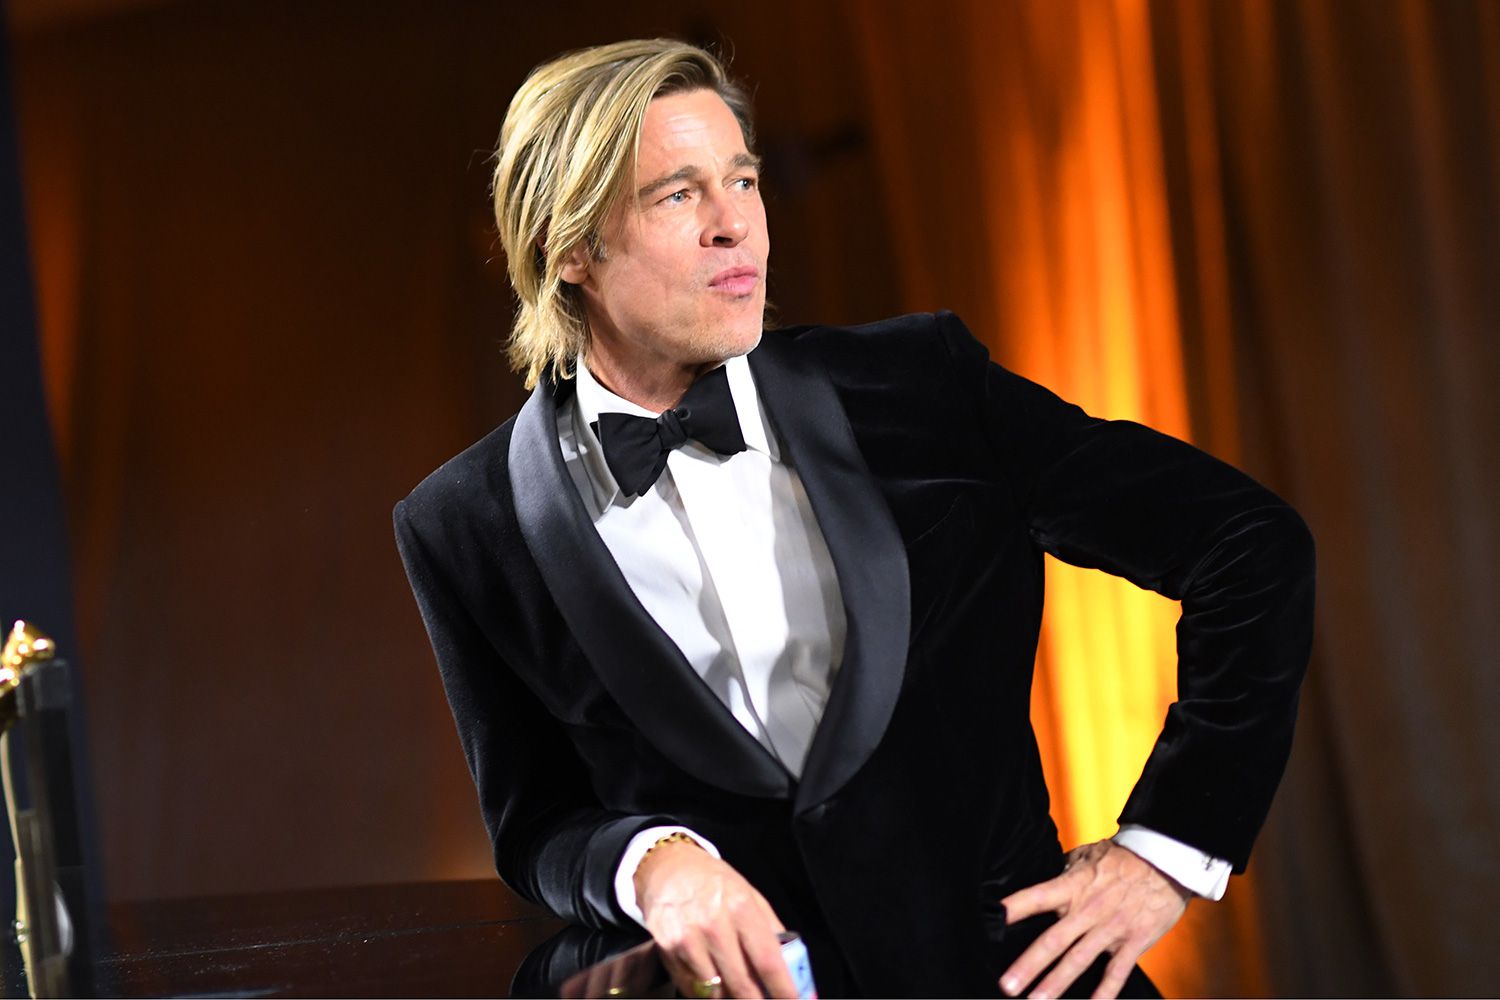 Brad Pitt waits for his award for Best Actor in a Supporting Role to be engraved as he attends the 92nd Oscars Governors Ball at the Hollywood & Highland Center in Hollywood, California on February 9, 2020